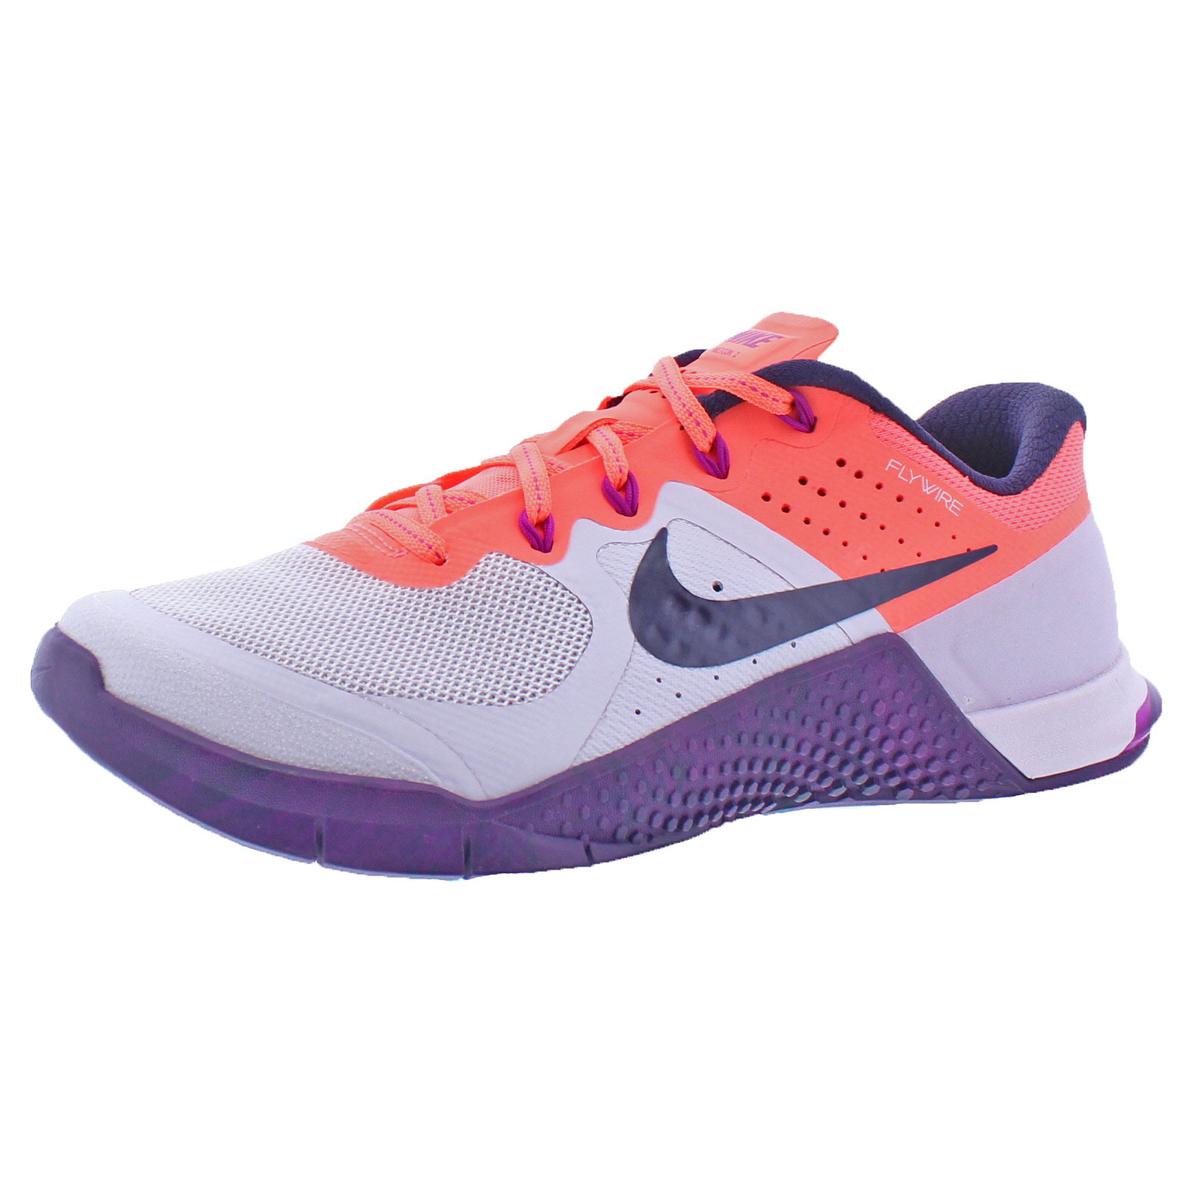 basketball Faithful Surroundings Nike Metcon 2 Womens Flywire Sticky Rubber Running, Cross Training Shoes